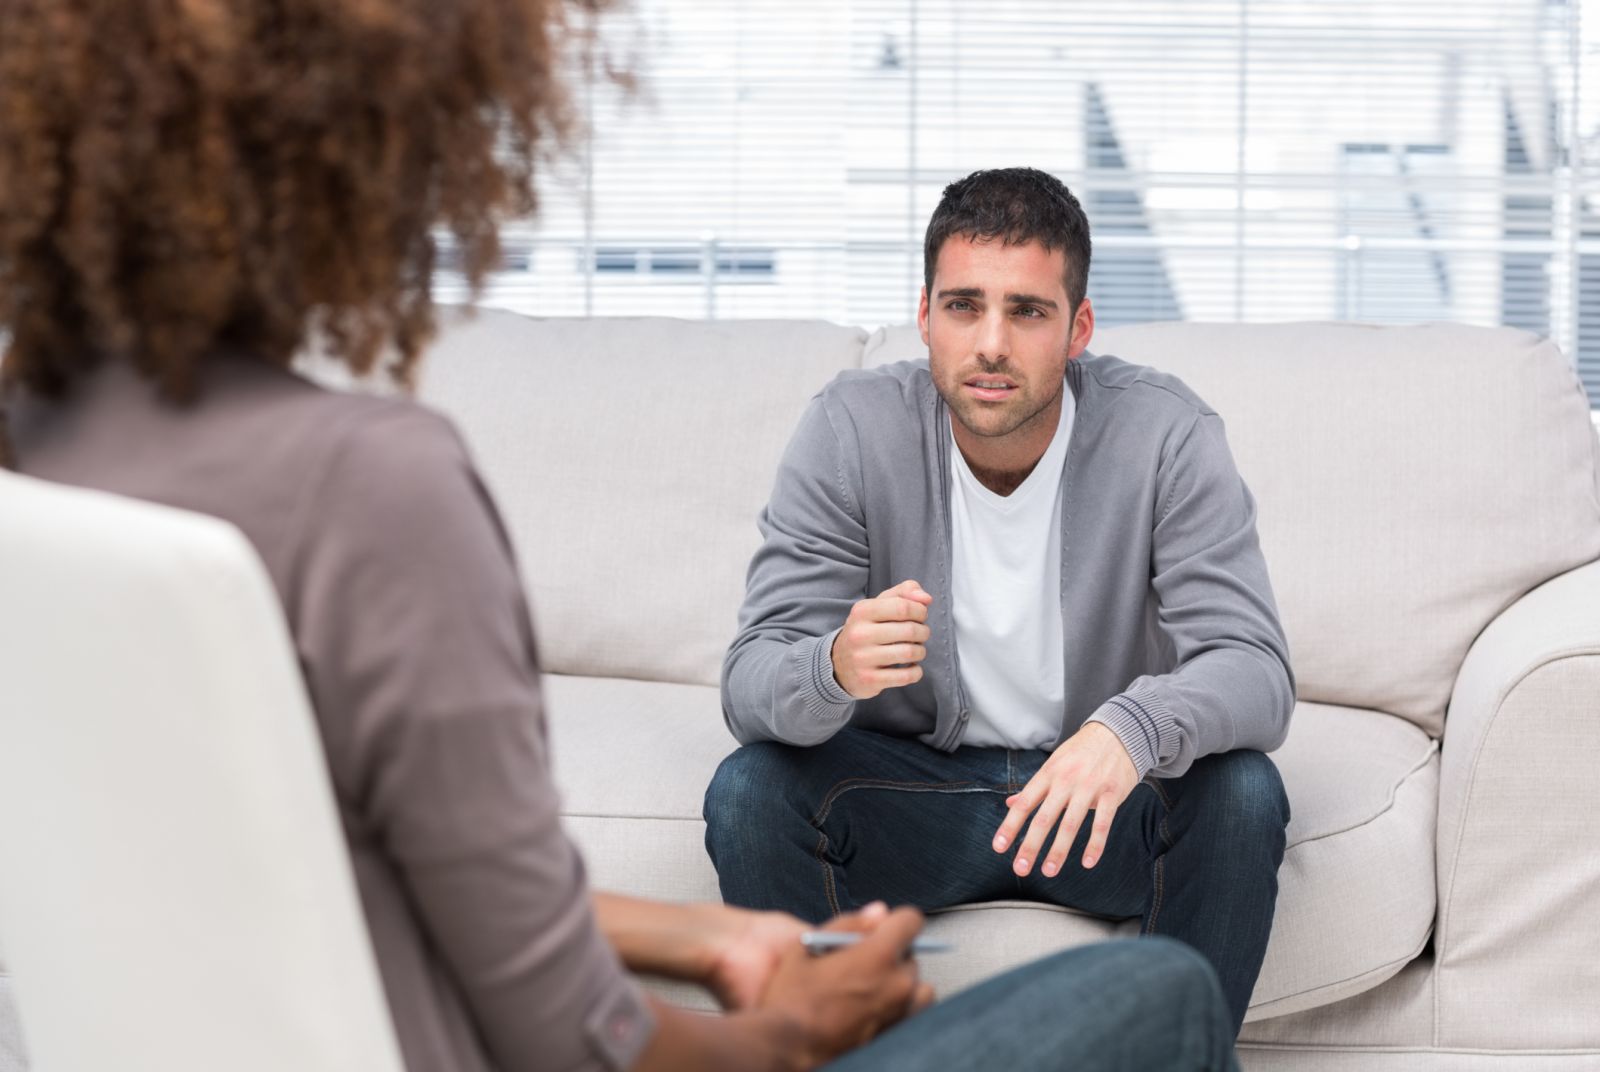 A man gestures as he speaks to a therapist